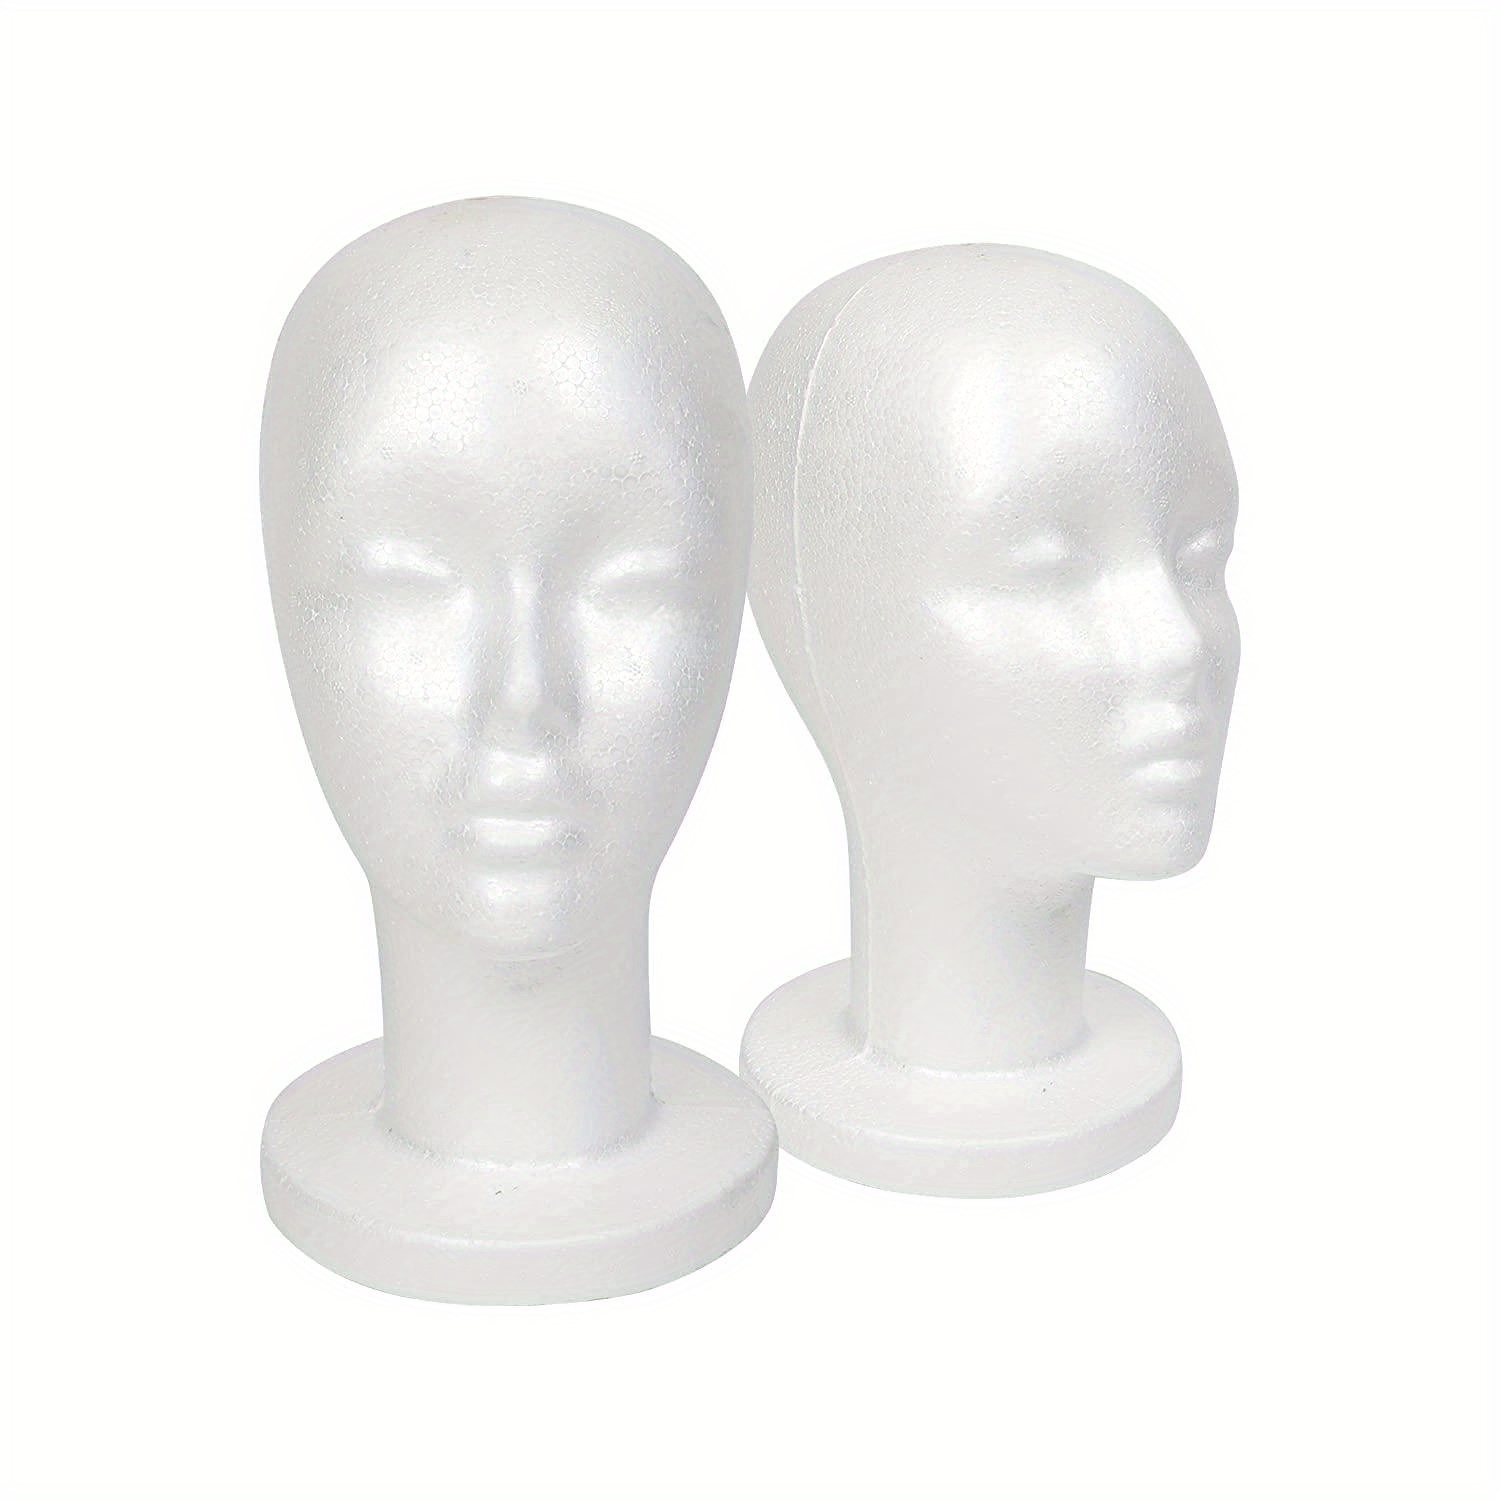 2 Pieces Foam Wig Head - Female Styrofoam Mannequin Hairpieces Stand Holder  Wig Display for Home Salon and Travel